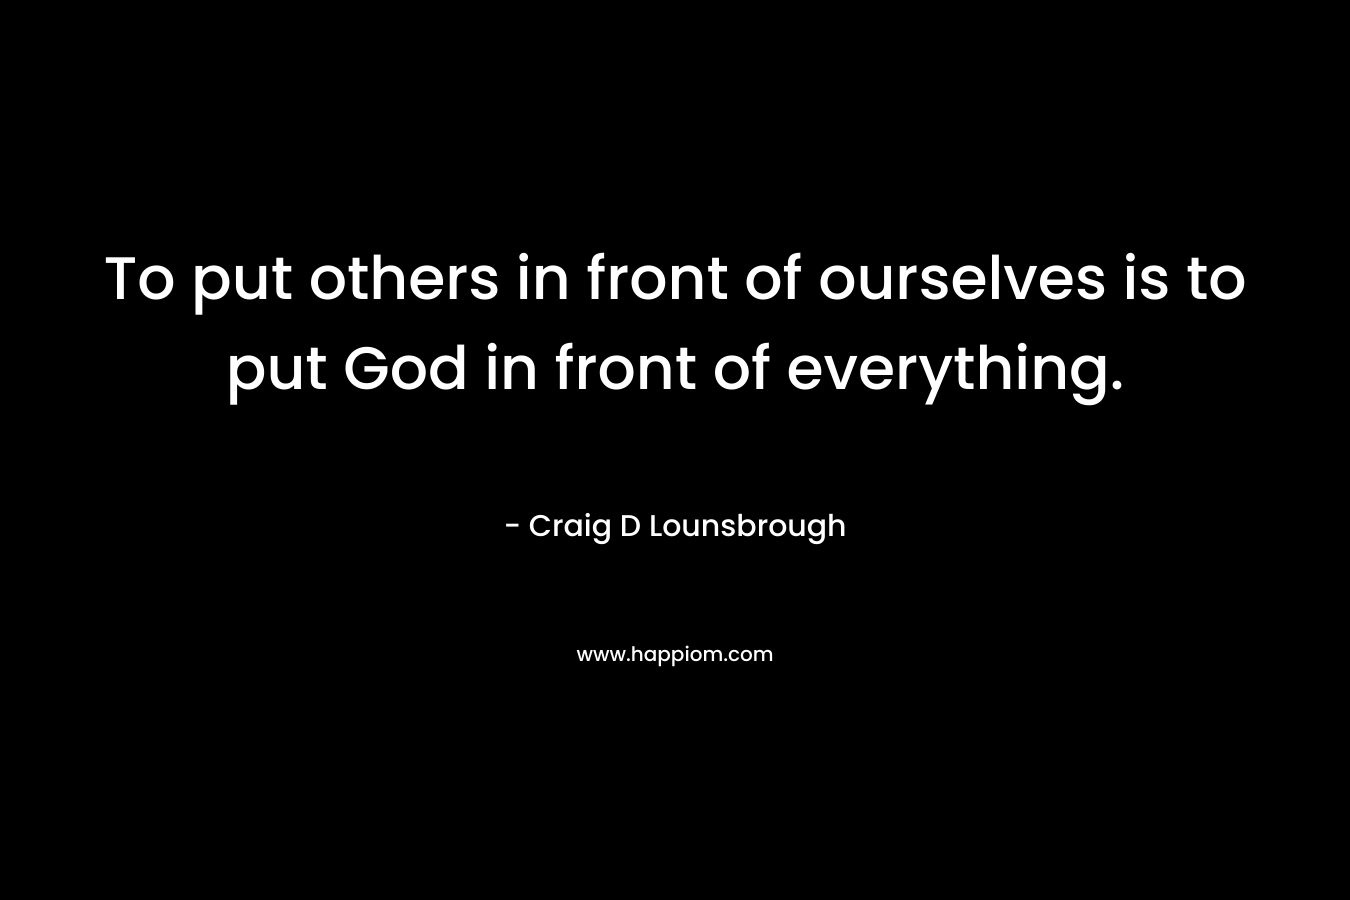 To put others in front of ourselves is to put God in front of everything.